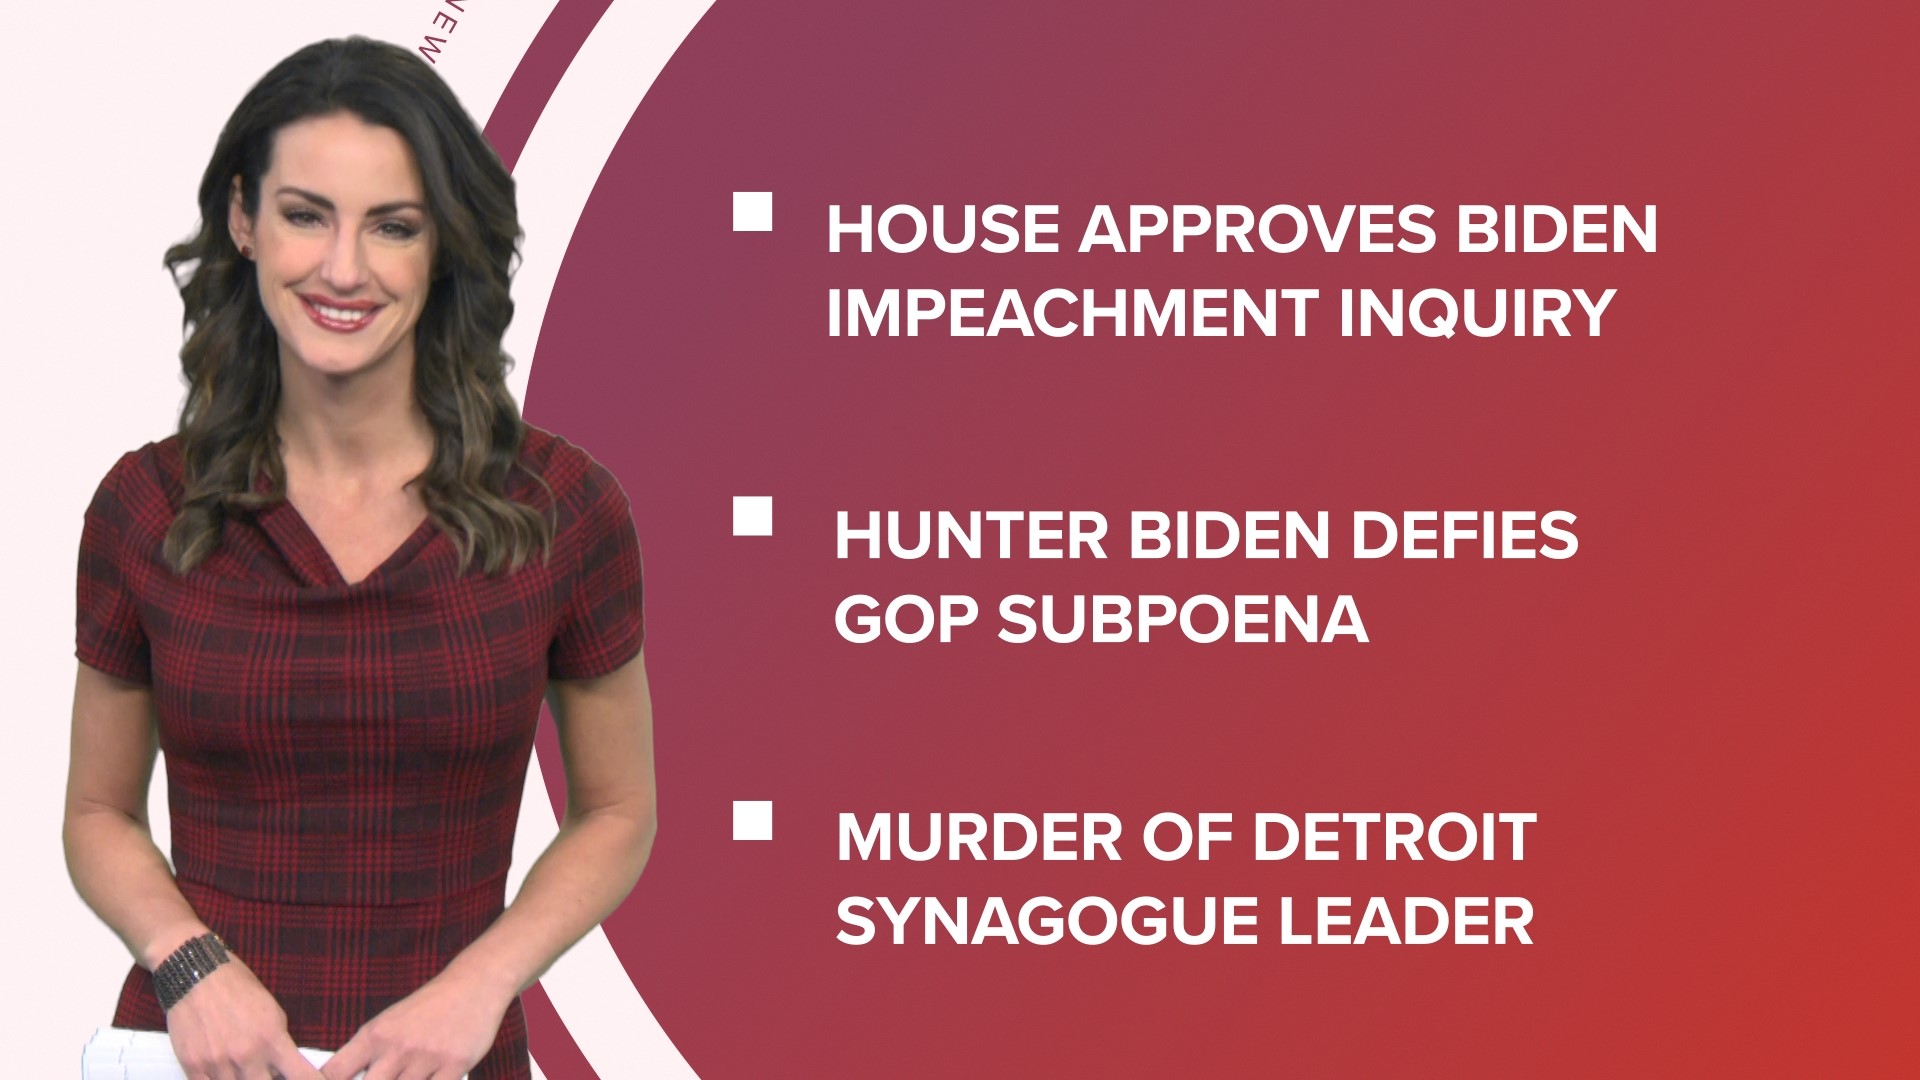 A look at what is happening in the news from the House approving an impeachment inquiry into President Biden to the correct gift etiquette for postal carriers.